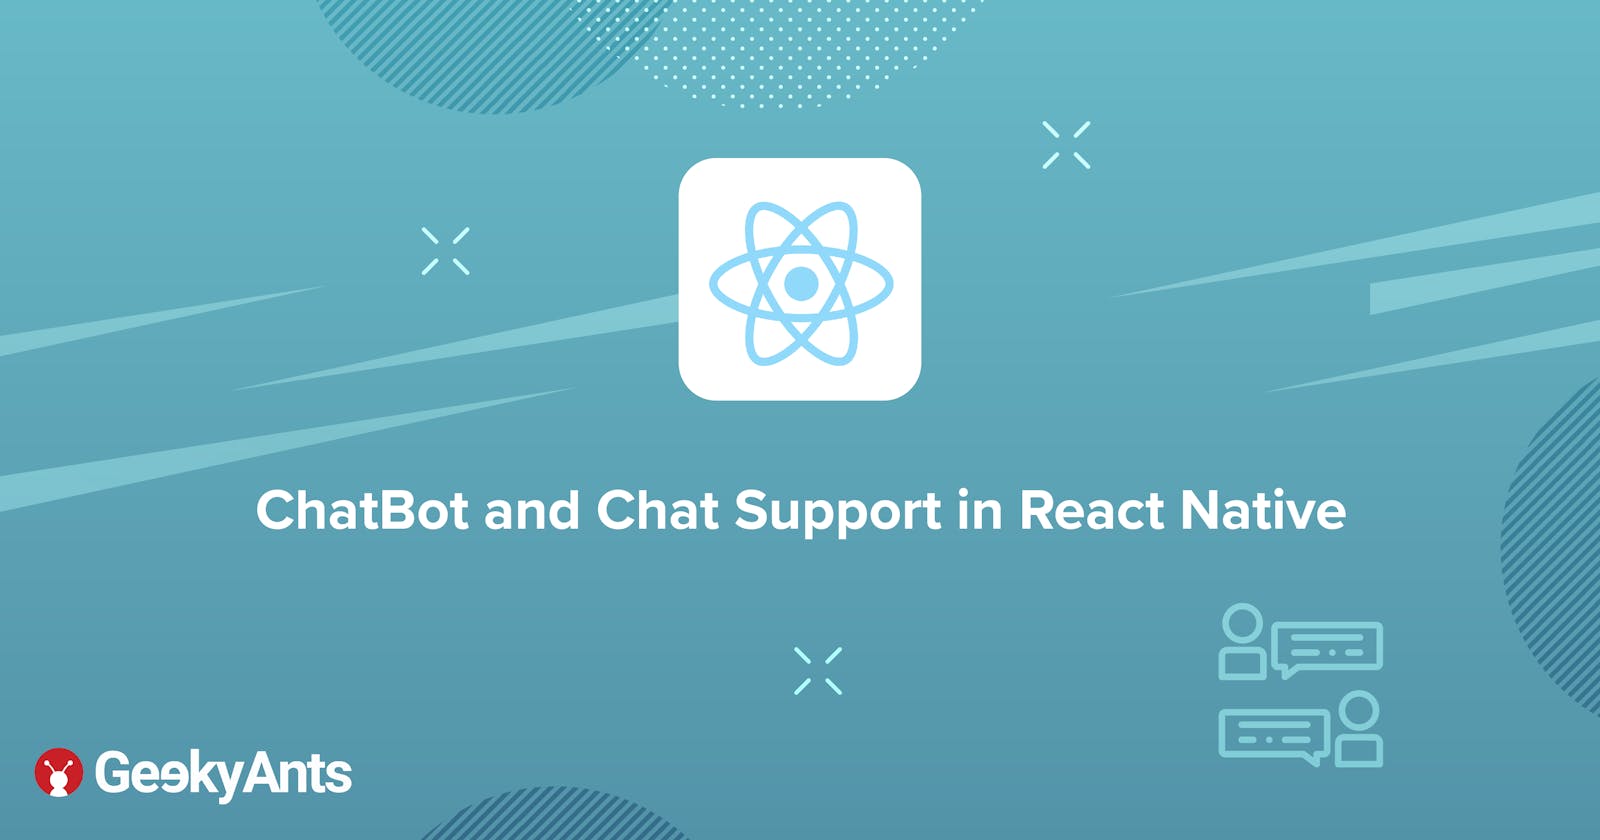 ChatBot and Chat Support in React Native